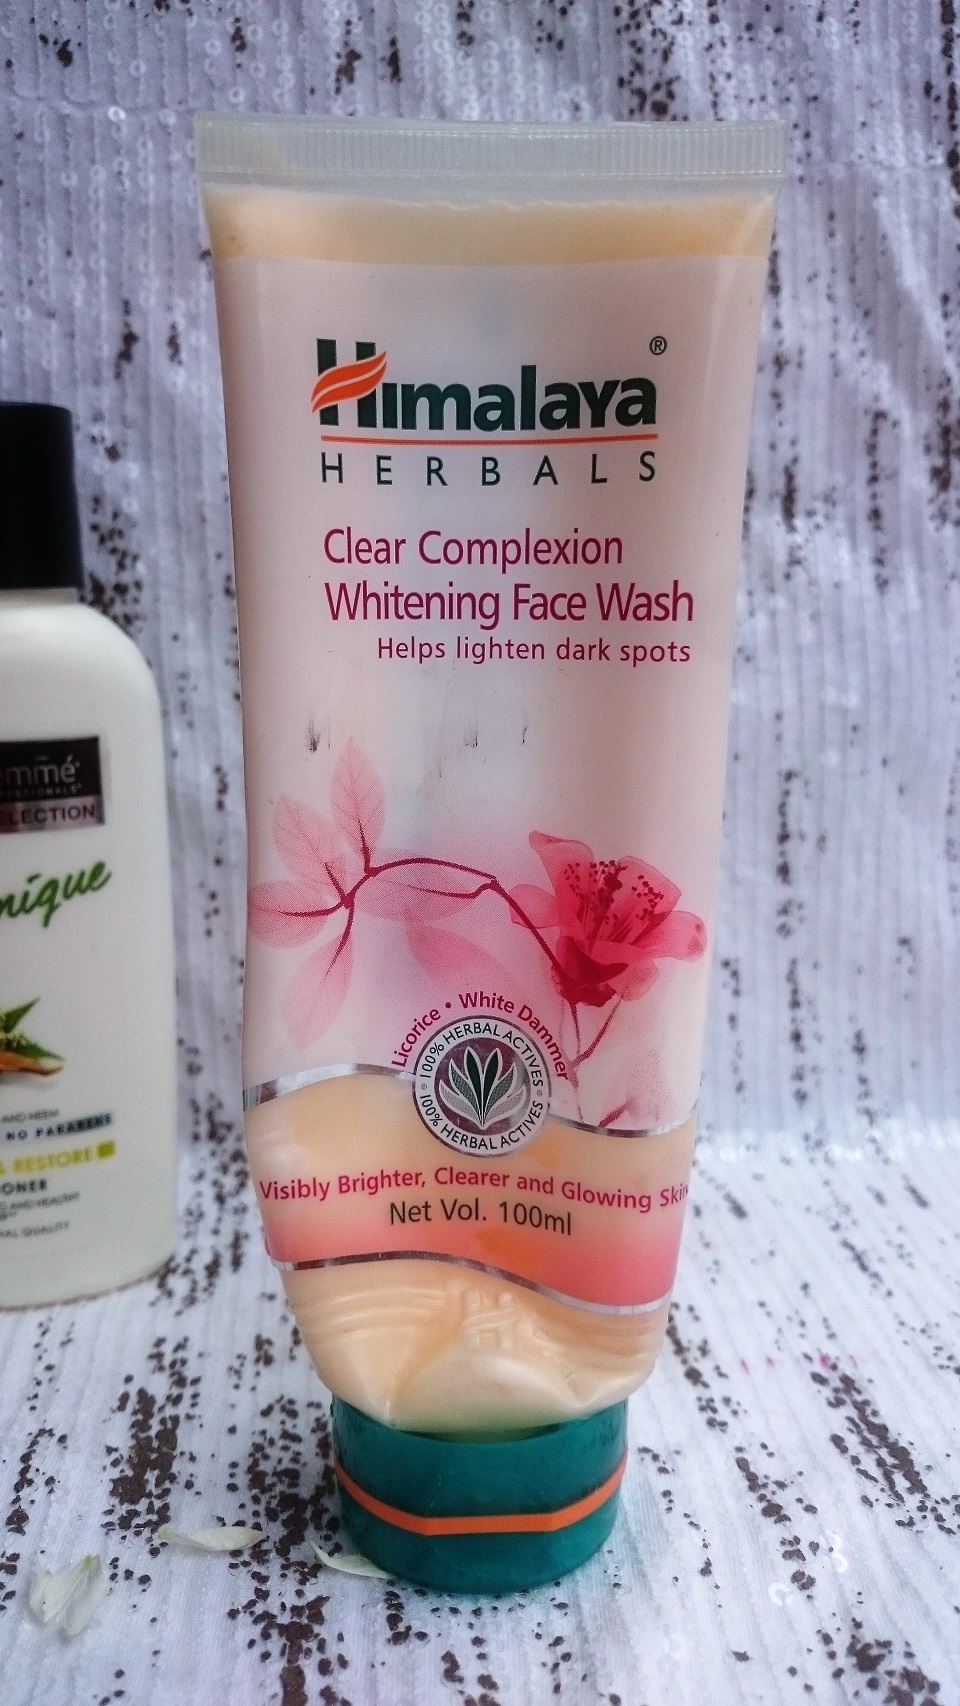 Empties June 2017 - Himalaya Clear Complexion Whitening Face Wash